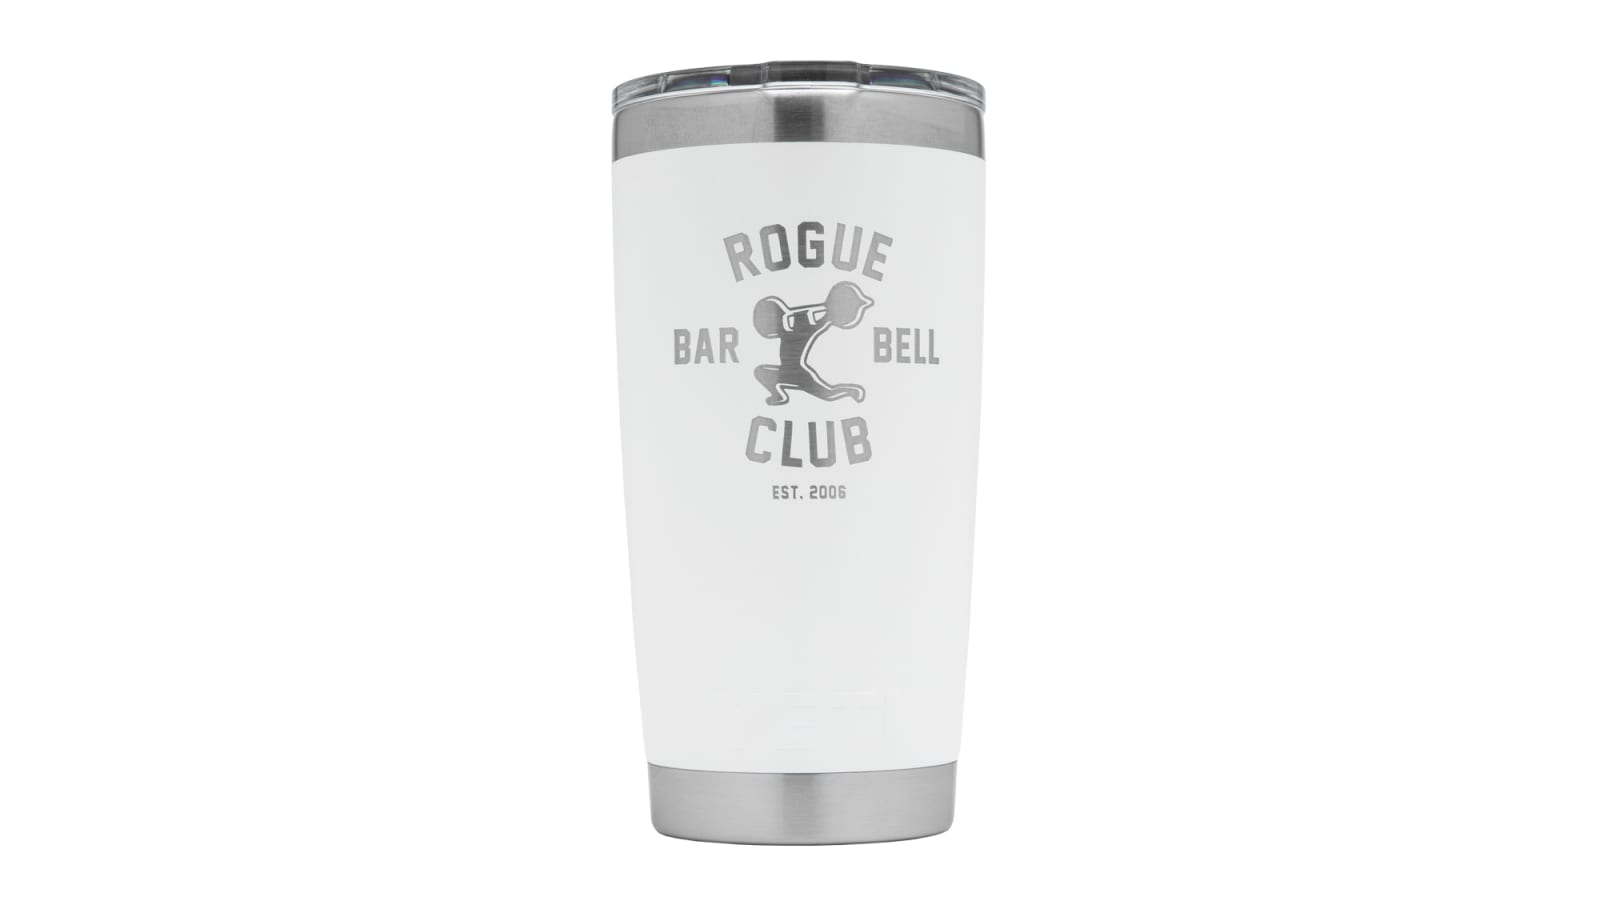 https://assets.roguefitness.com/f_auto,q_auto,c_limit,w_1600,b_rgb:ffffff/catalog/Gear%20and%20Accessories/Accessories/Shakers%20and%20Bottles/YT0045/YT0045-H_rrdcp7.png